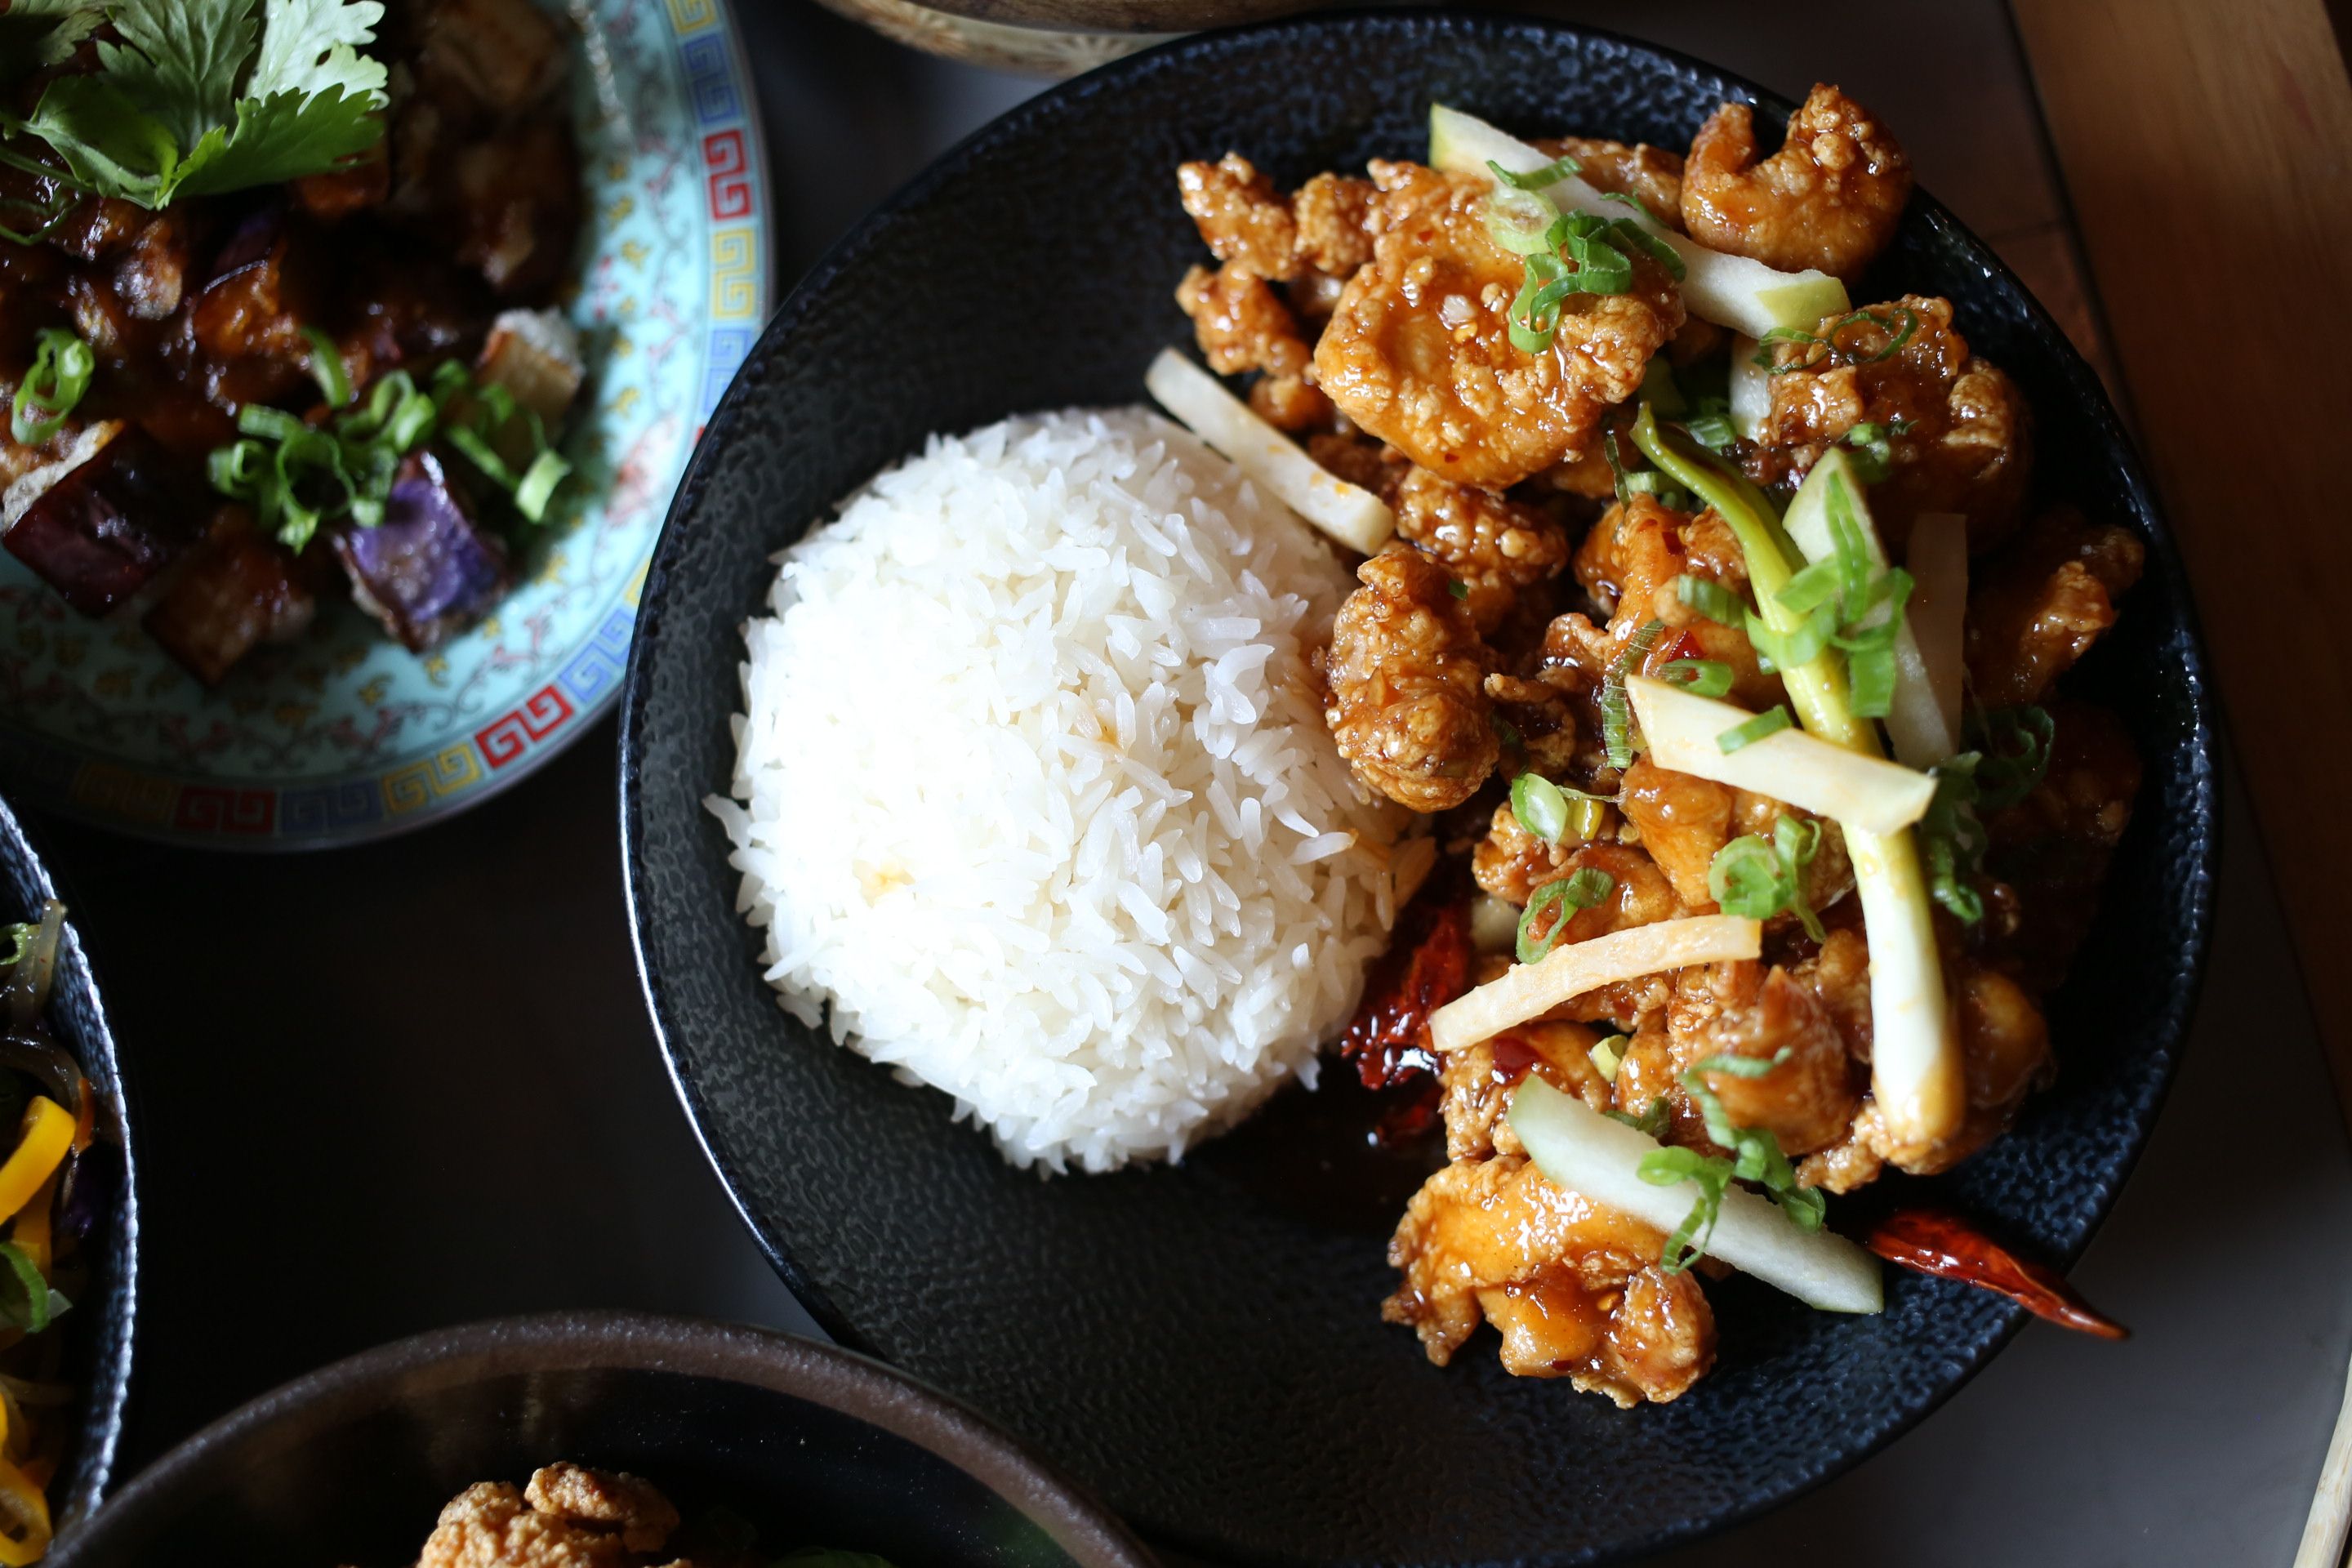 The General Tso’s Chicken at Old Thousand